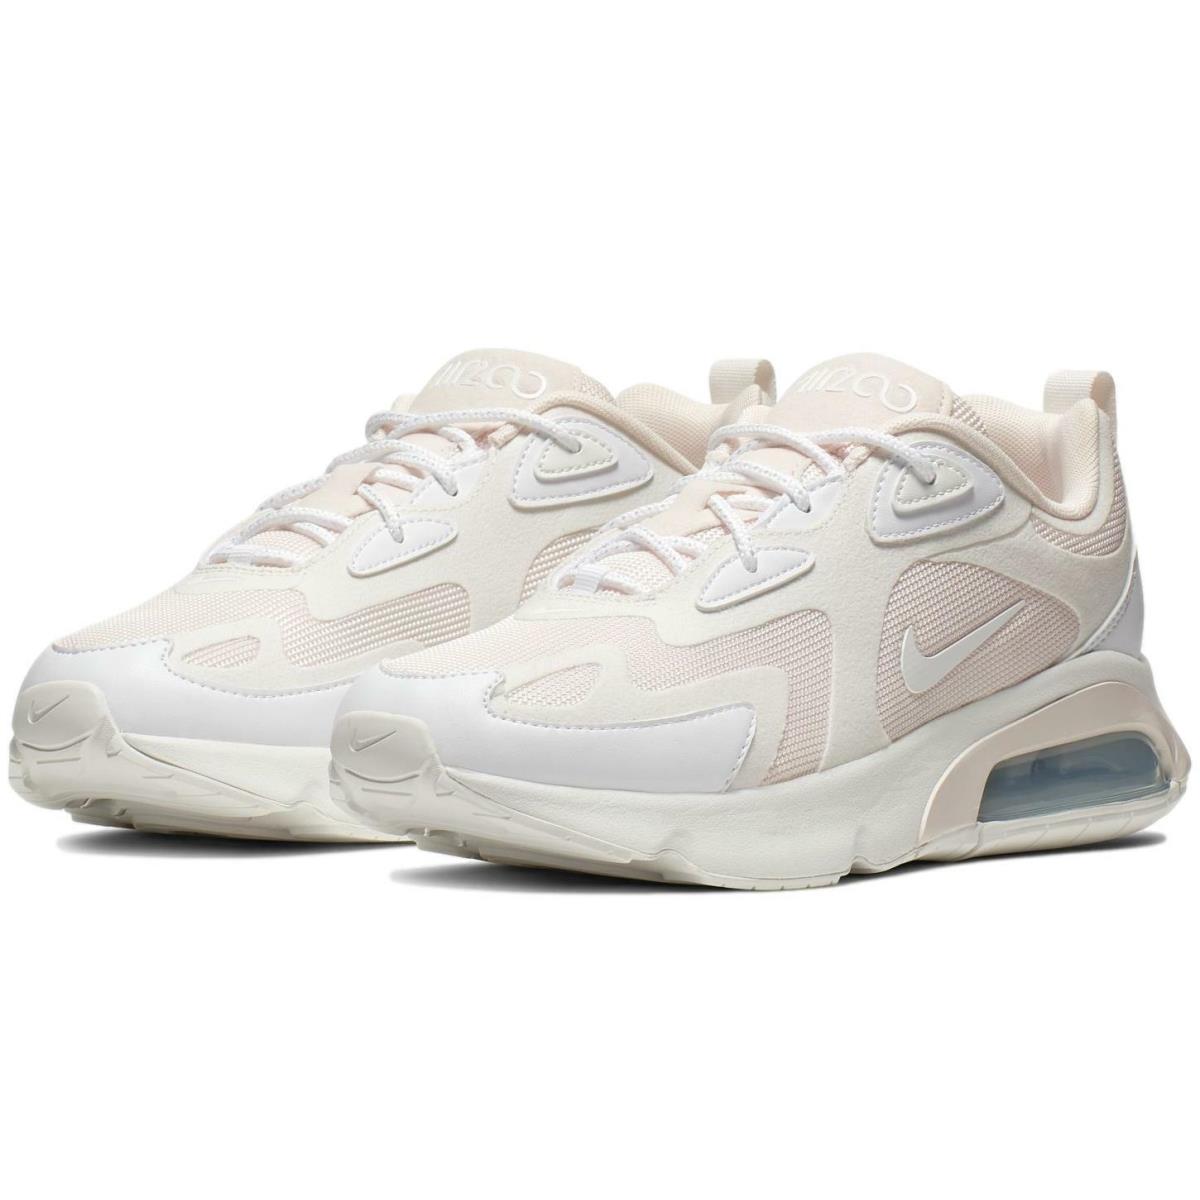 Nike Women`s Air Max 200 `light Soft Pink` Shoes AT6175-600 - Light Soft Pink/White